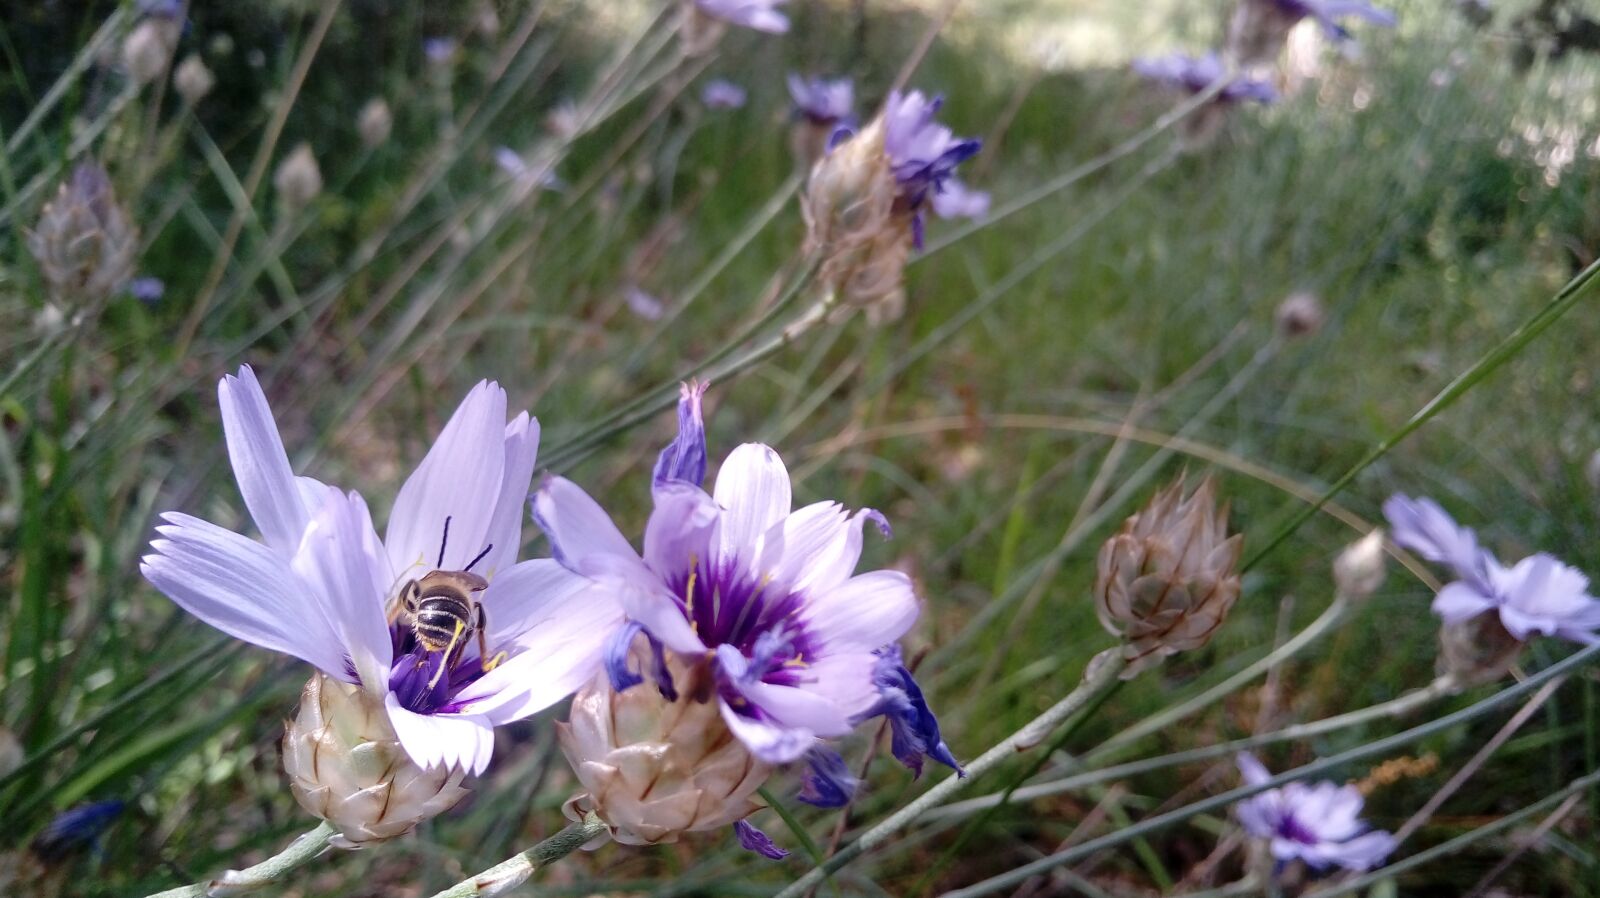 LG X POWER sample photo. Flowers, bumblebee, insect photography